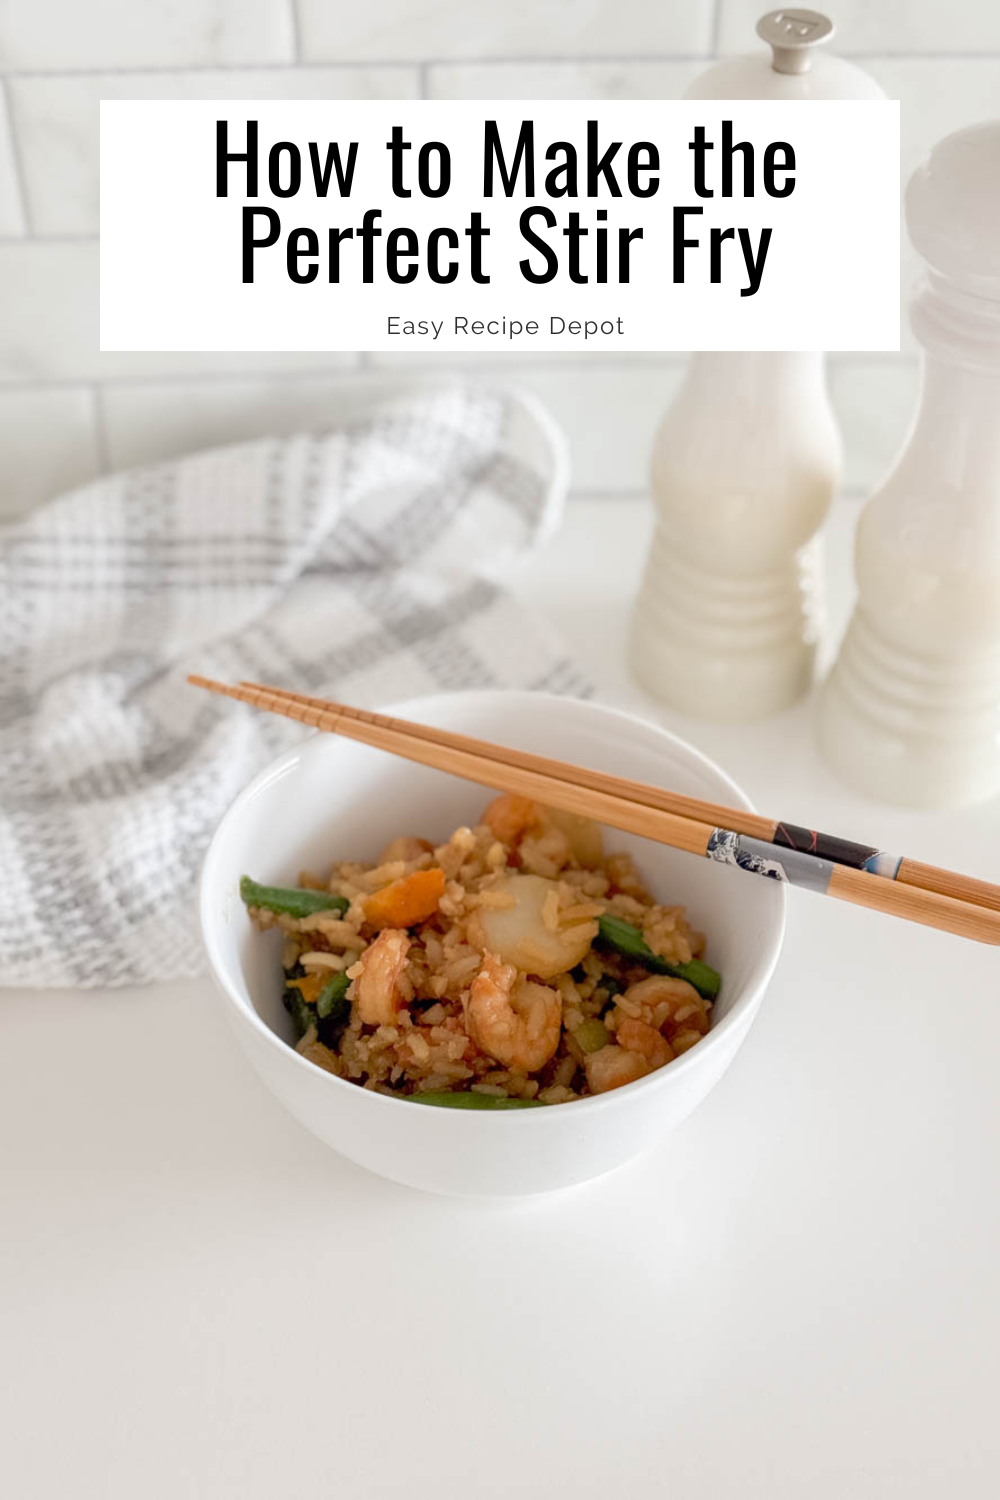 Easy shrimp stir fry served in a white bowl, with a tea towel, chop sticks sitting on top of bowl, and salt and pepper shakers